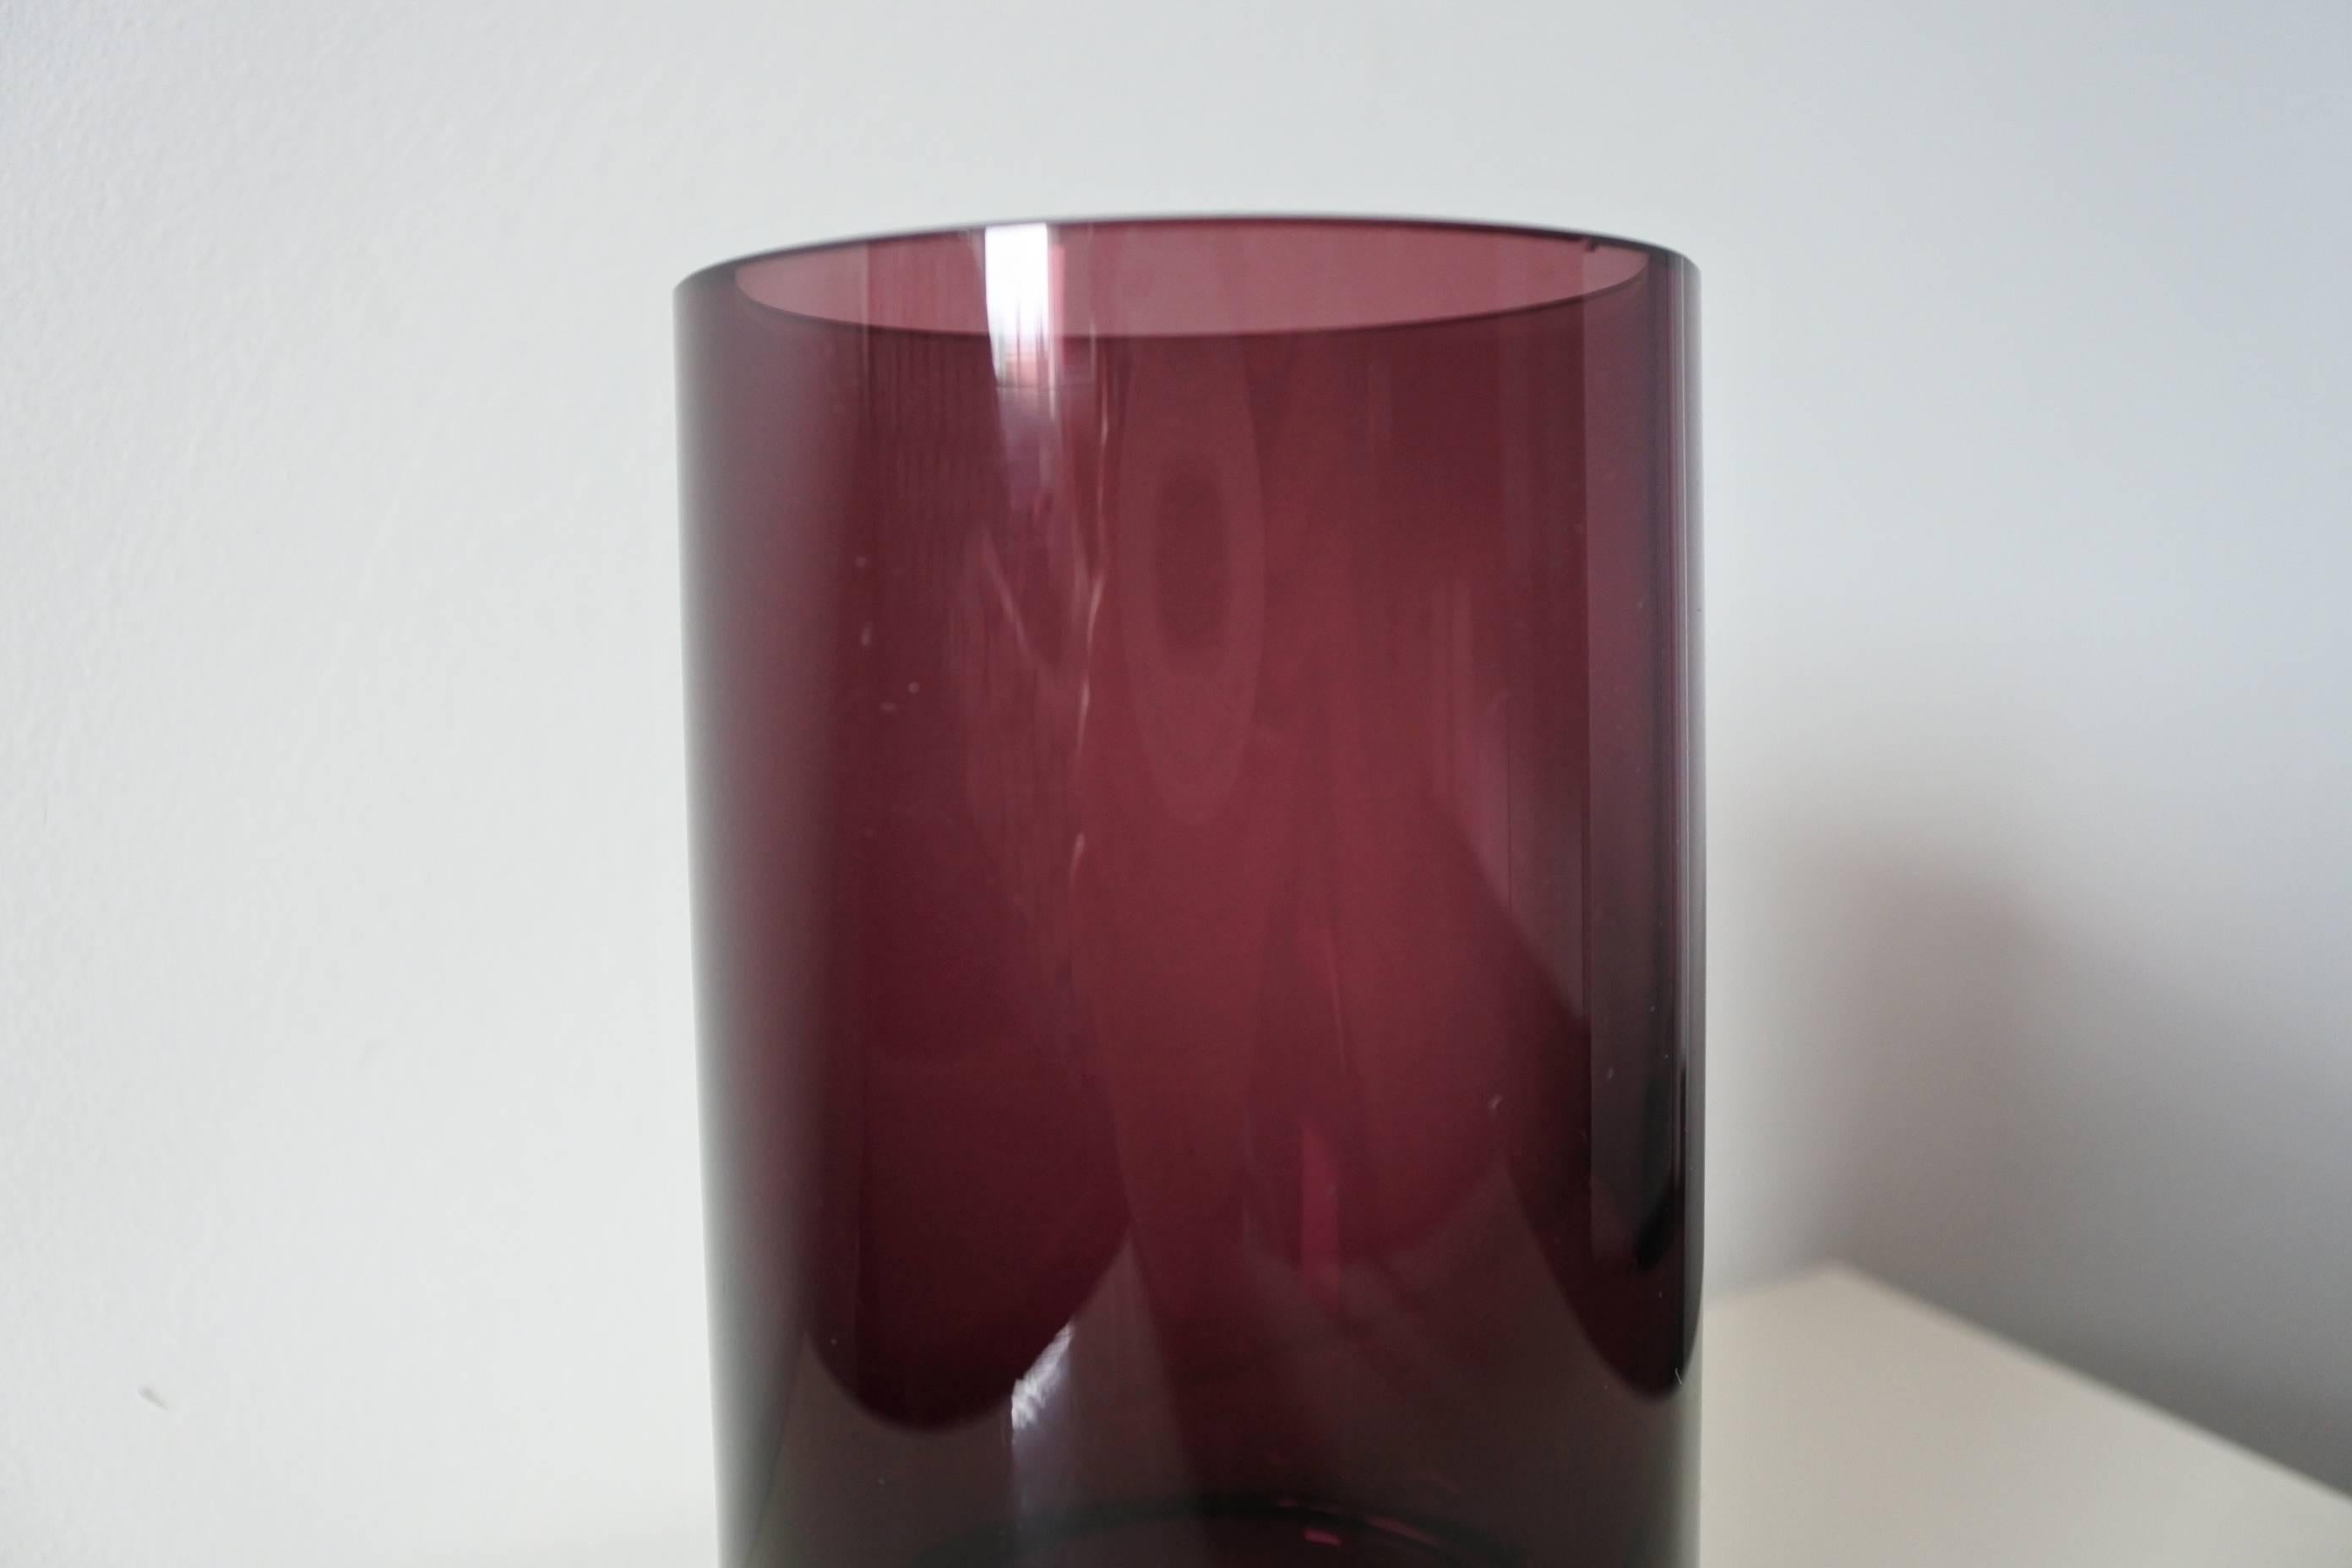 Vase by Tapio Wirkkala.
Turned mould blown cased glass, rim cut.
Signed Tapio Wirkkala - 3581
Edited by Iittala,
circa 1960
Documented in the book 